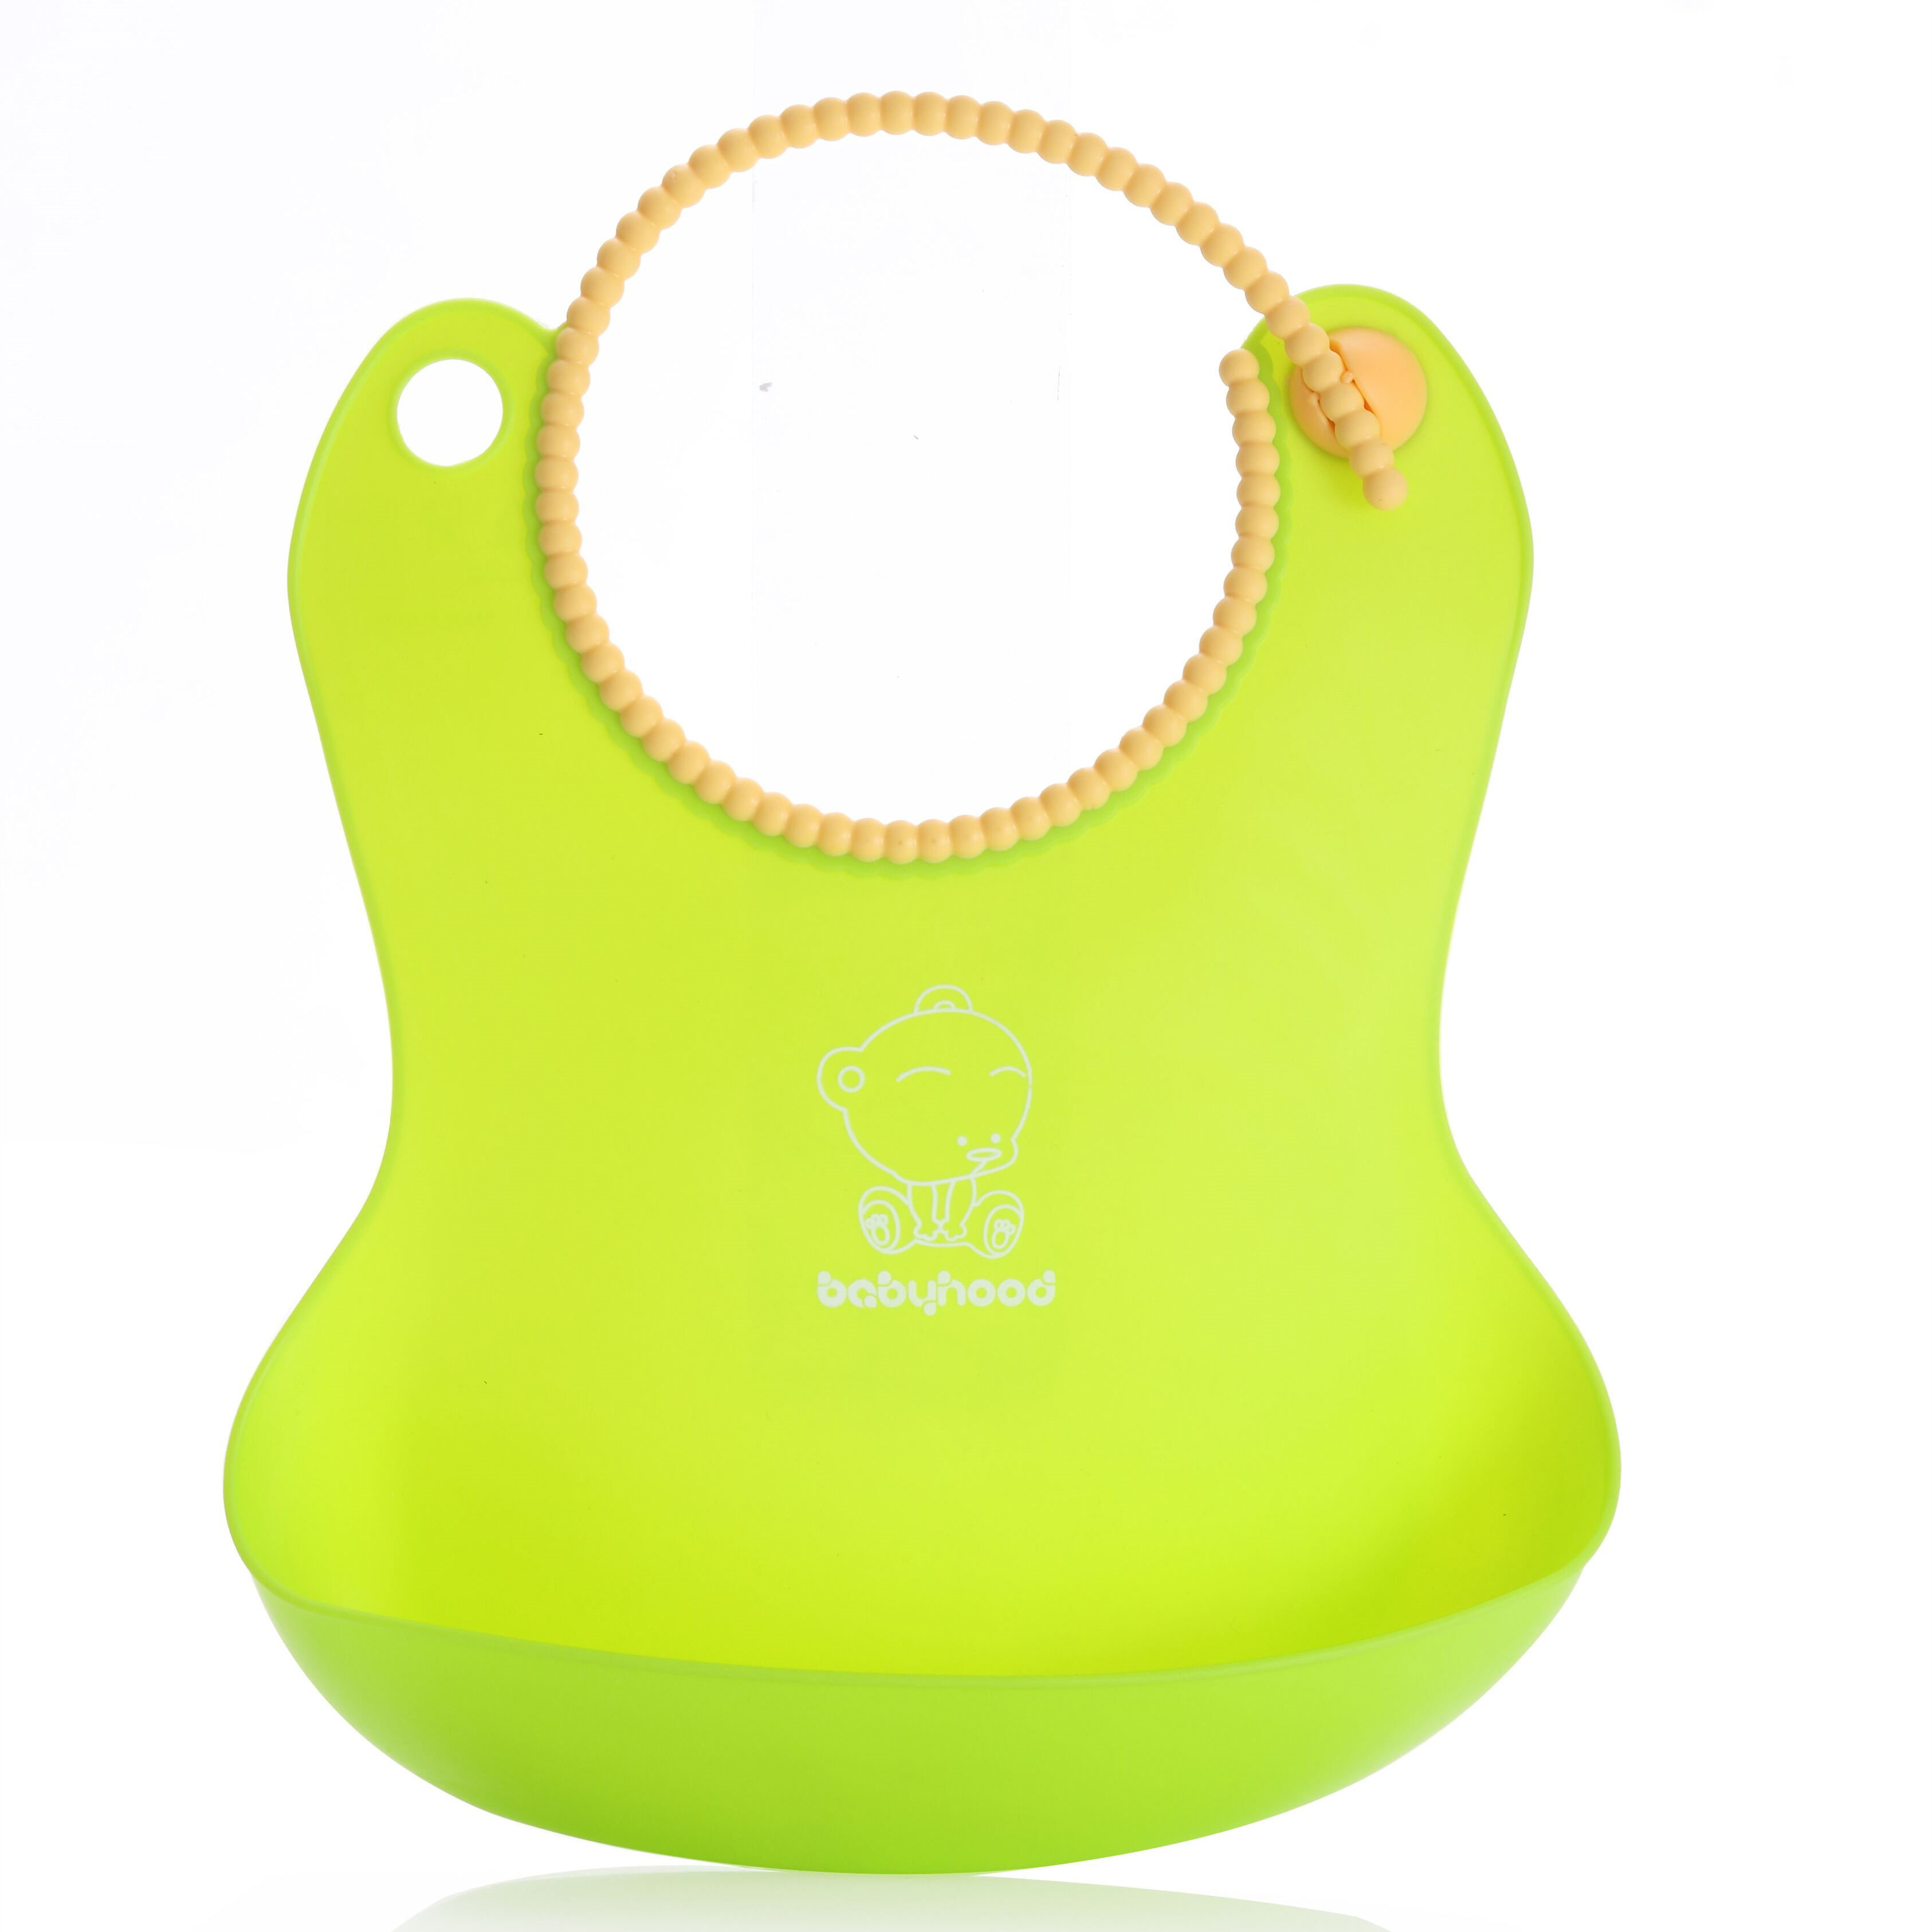 Best Famous High Chairs Children Baby Feeding Seat Manufacturer –  Wholesale Customized Waterproof Silicone Baby Bibs BH-401 – Babyhood